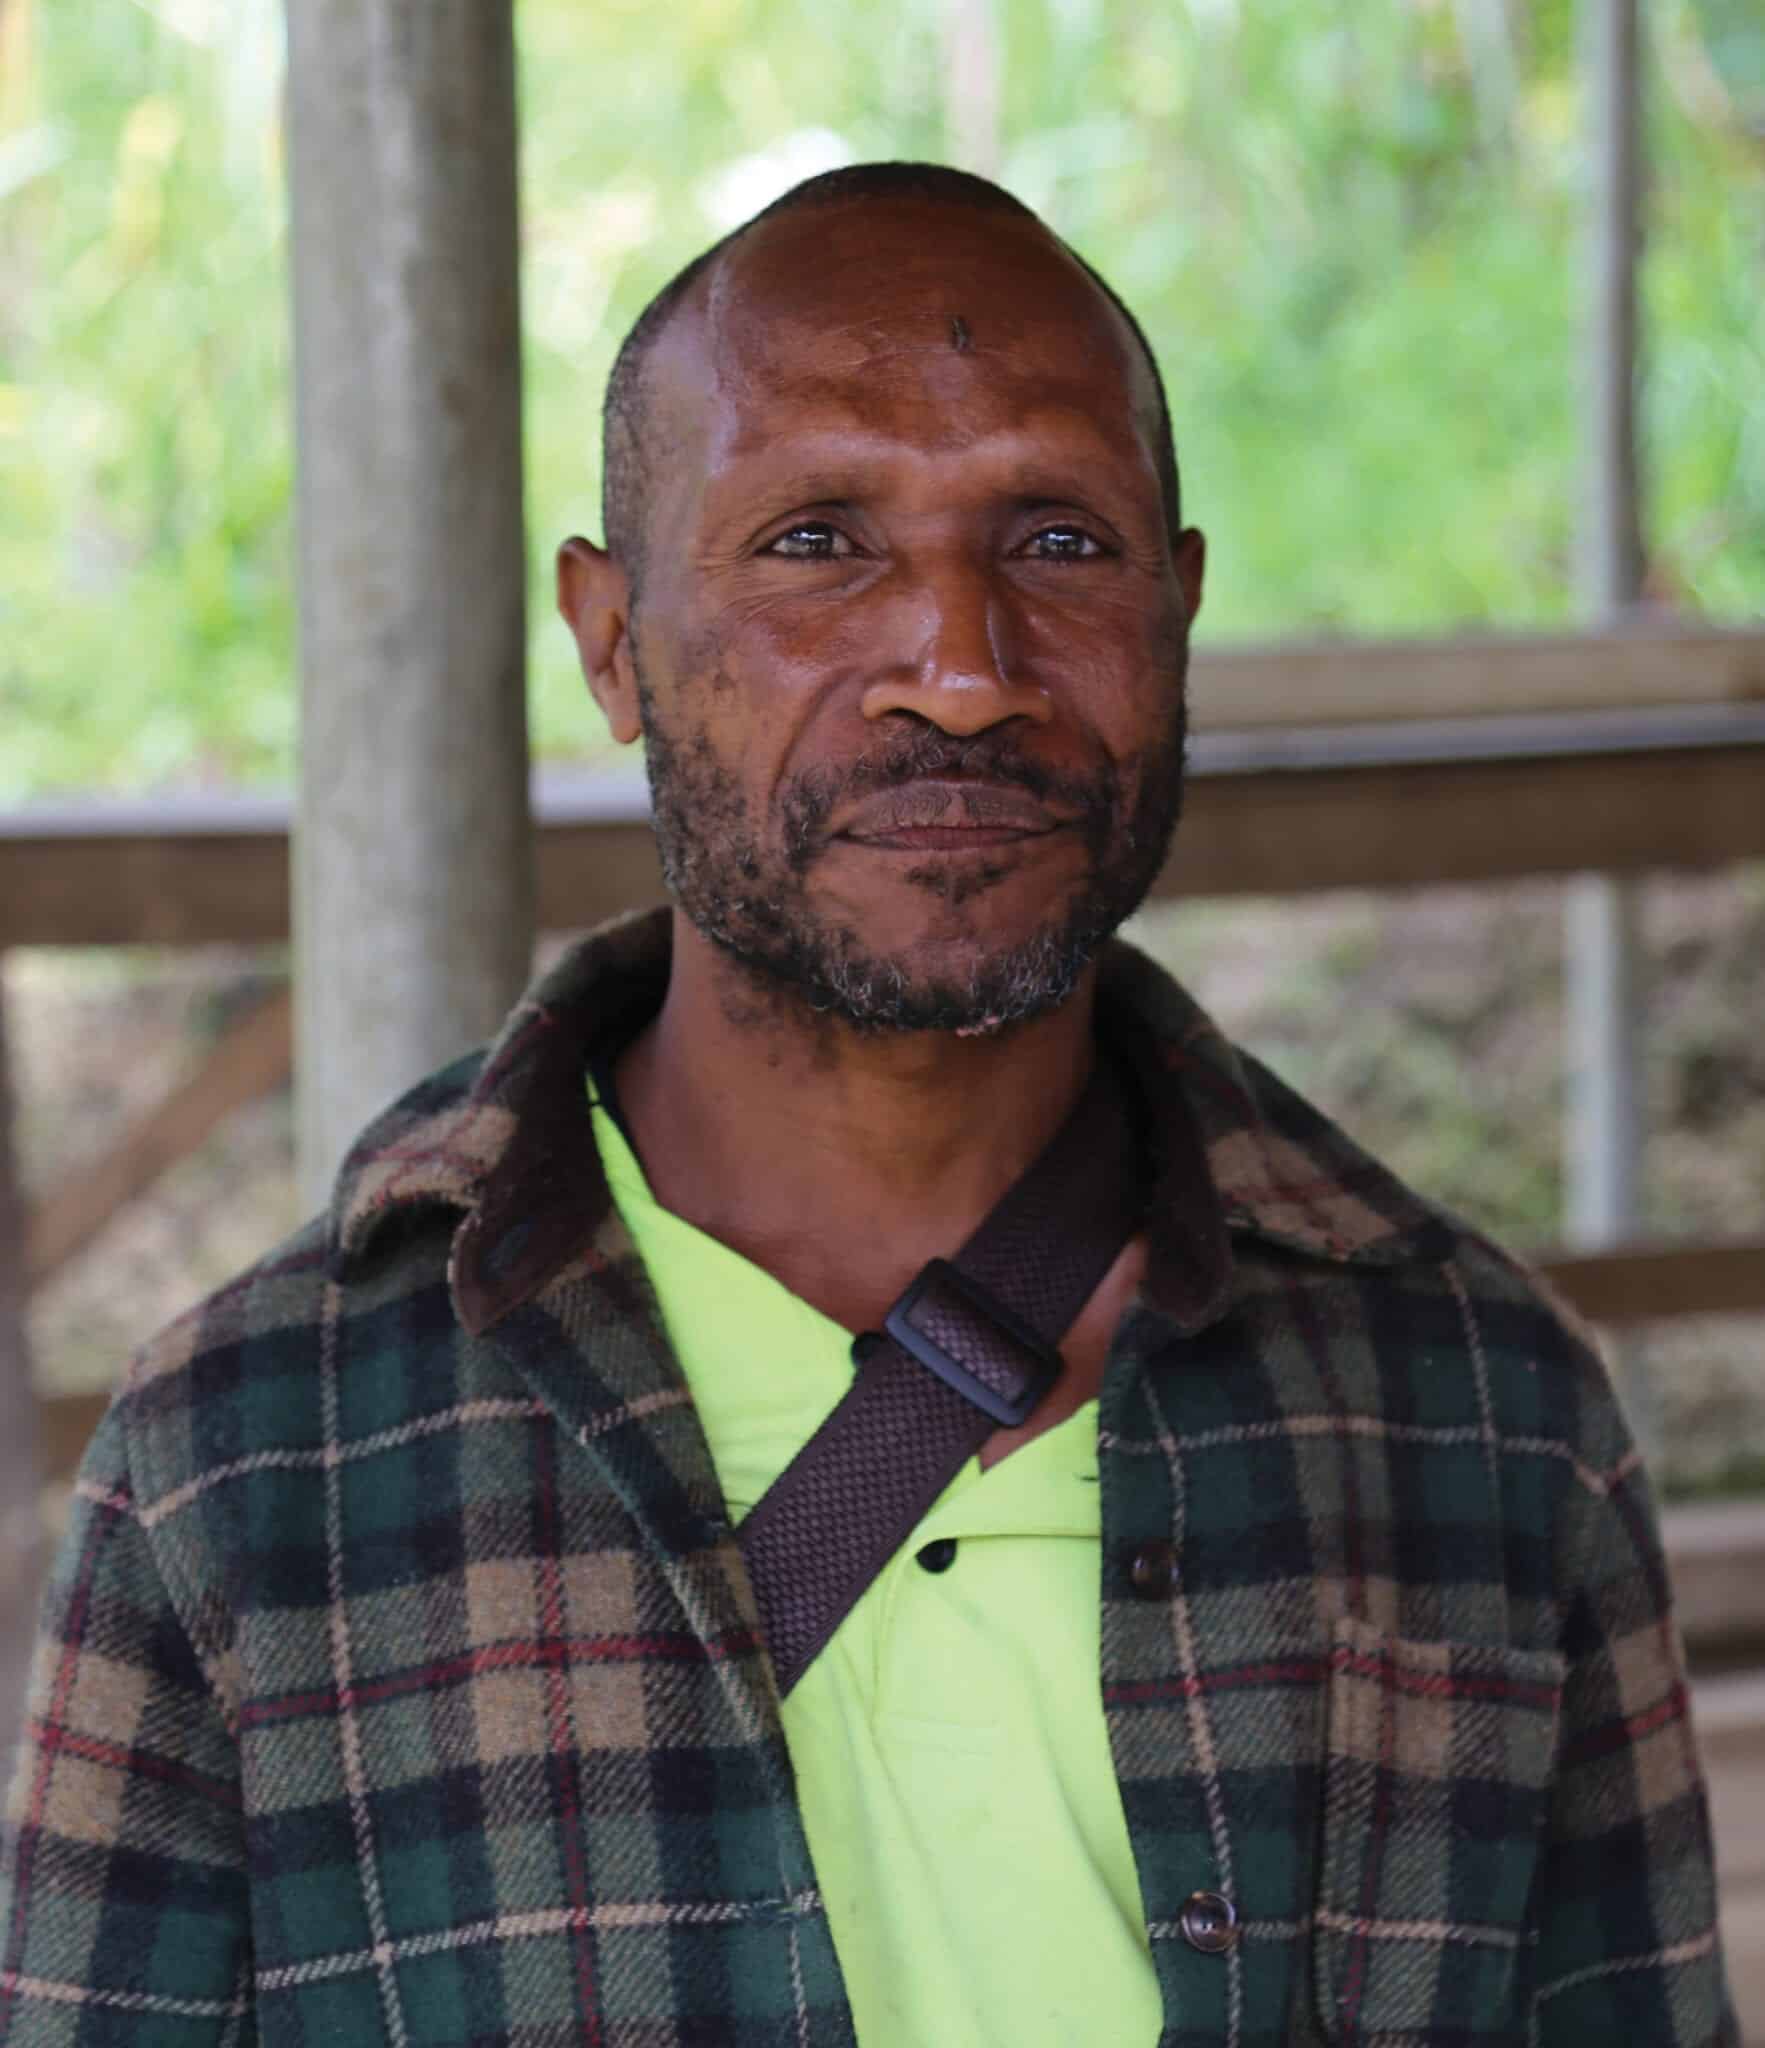 In partnership with MDF, SMS organises training sessions to smallholder famers like Tokam from PNG, which empowers them to not only increase their revenue by improving production but also to capture a global market for sustainably produced, certified, specialty coffee.